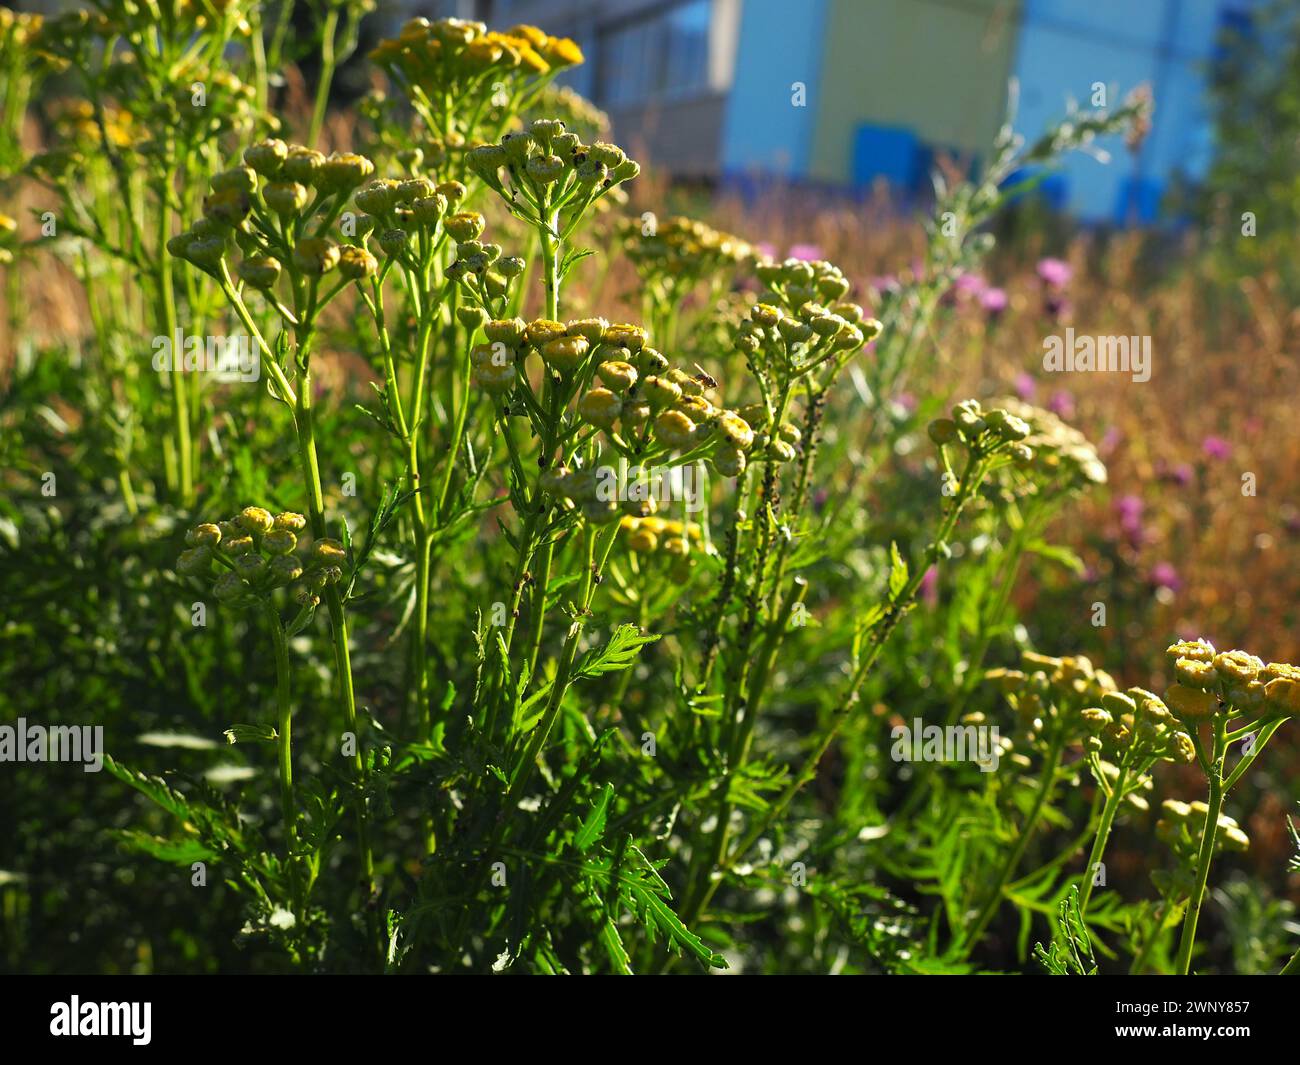 Tansy, Tanacetum, a genus of perennial herbaceous plants and shrubs of the Asteraceae family. Several tansy plants like a bouquet. Lawn with wild Stock Photo